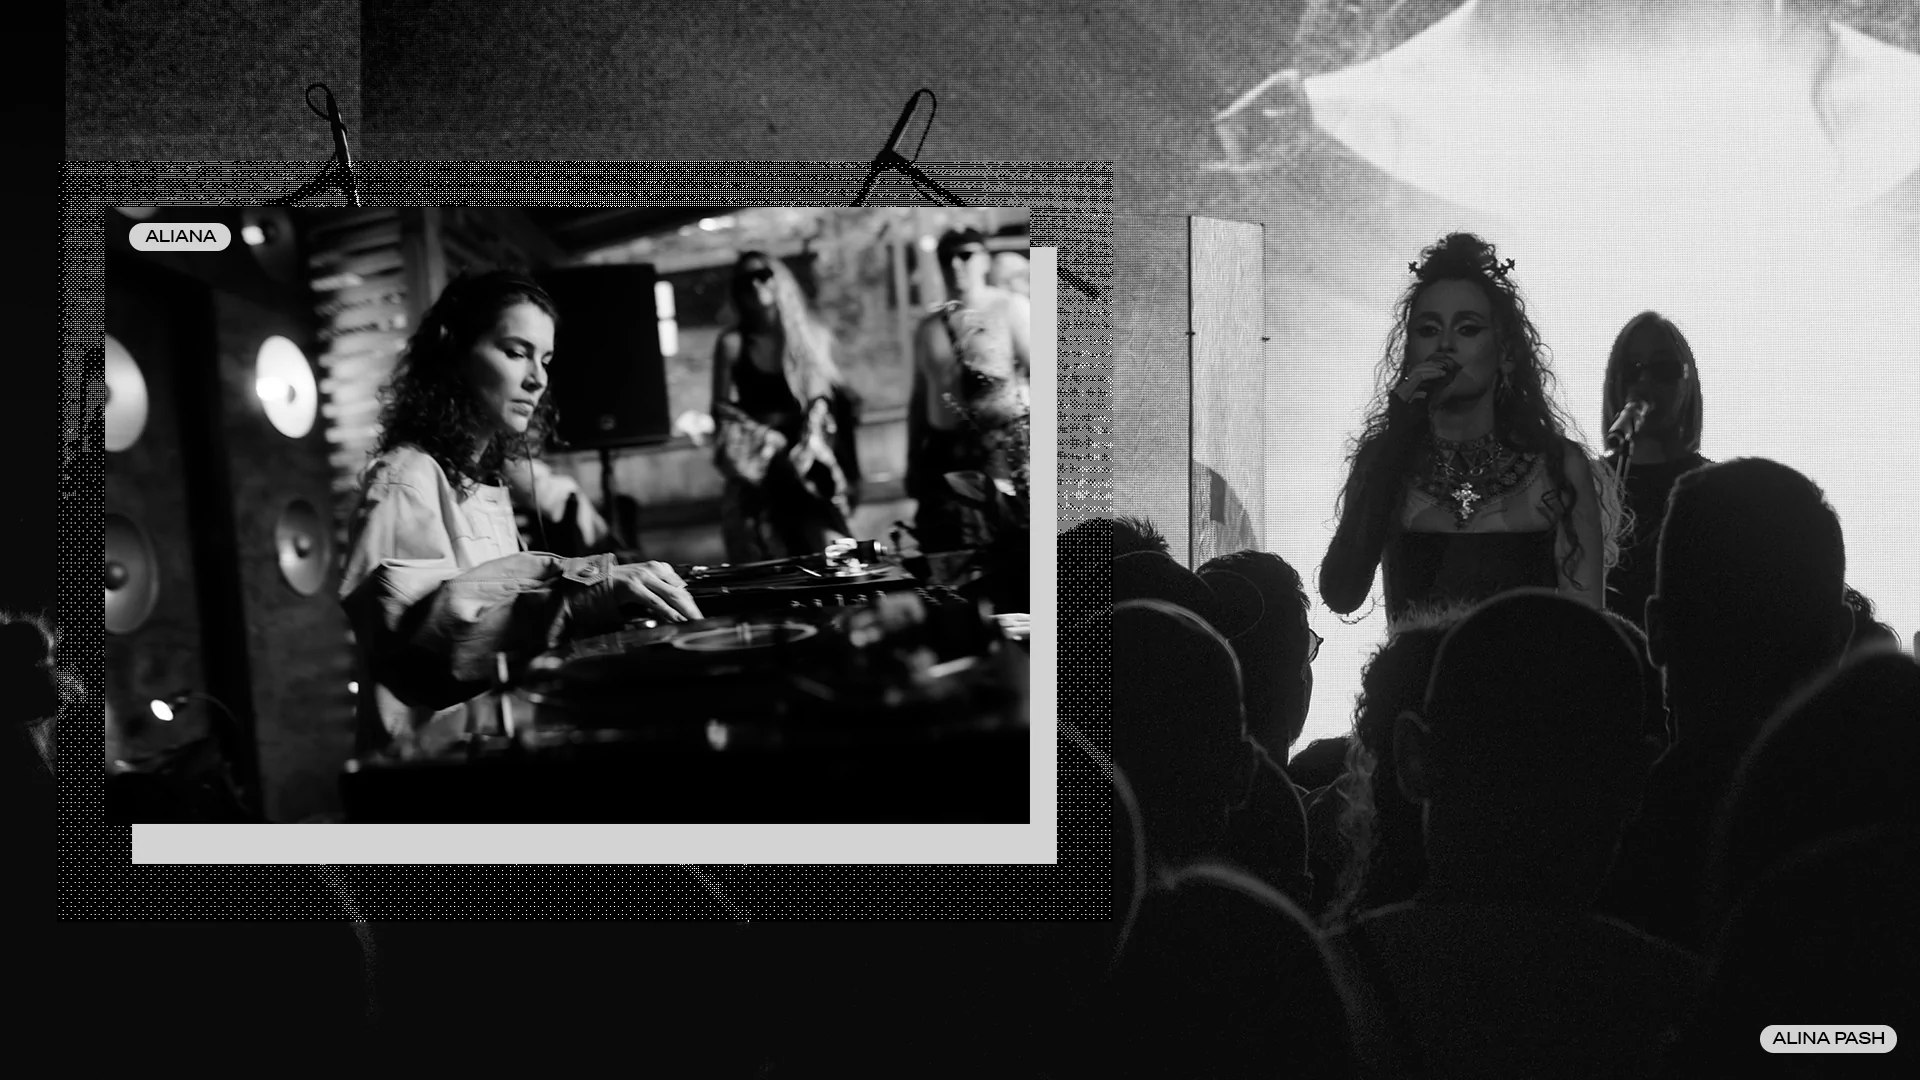 Photo of Dizzy from Alina Pash DJing collaged with a photo of the crowd at Strichka festival